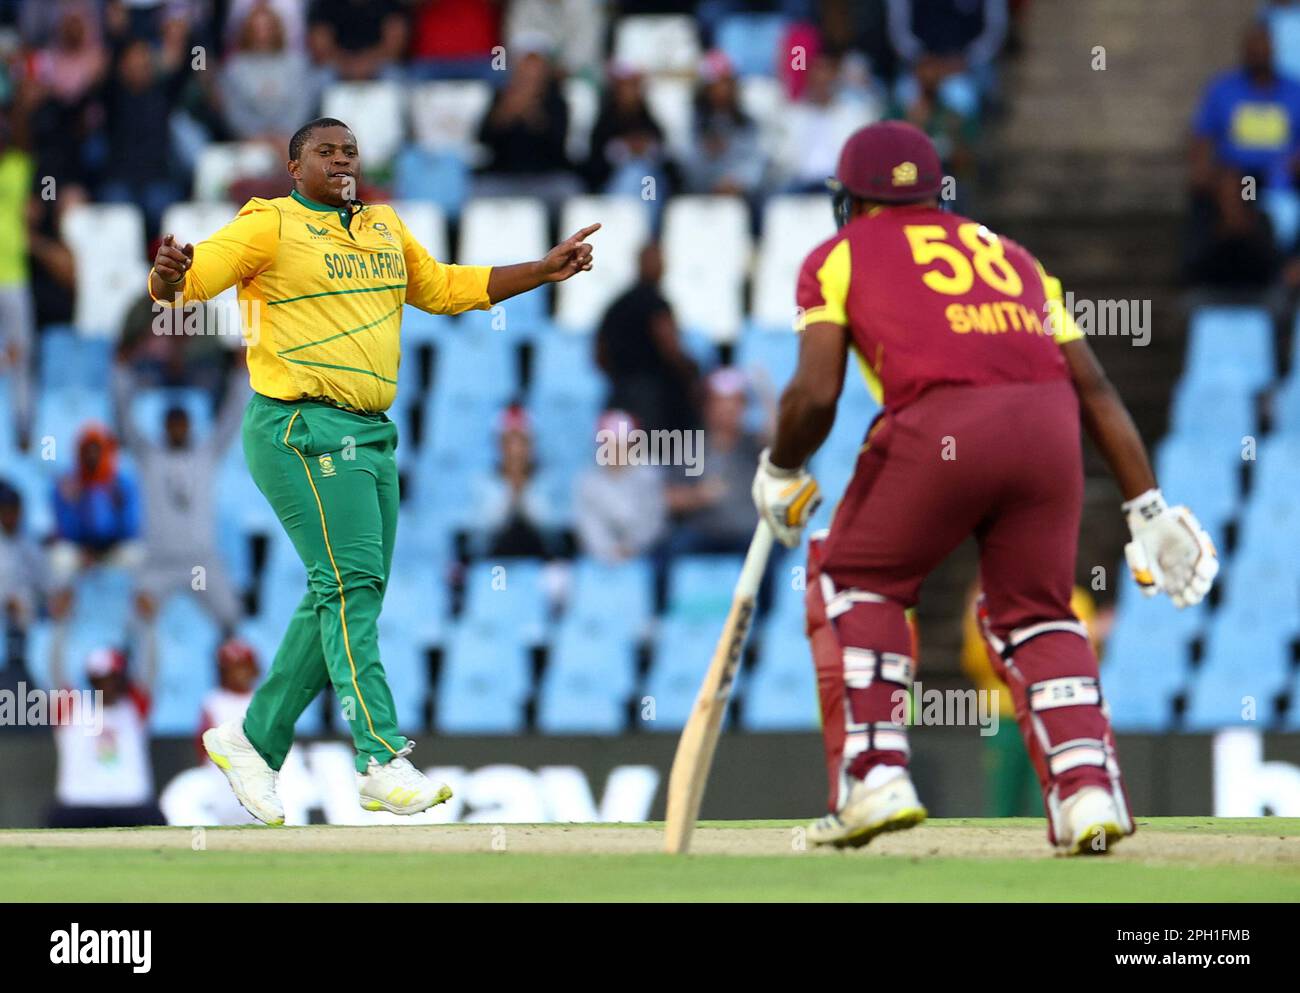 Cricket - First Twenty20 - South Africa v West Indies - SuperSport Park Cricket Stadium, Centurion, South Africa - March 25, 2023 South Africa's Sisanda Magala celebrates after taking the wicket of West Indies' Odean Smith REUTERS/Siphiwe Sibeko Stock Photo